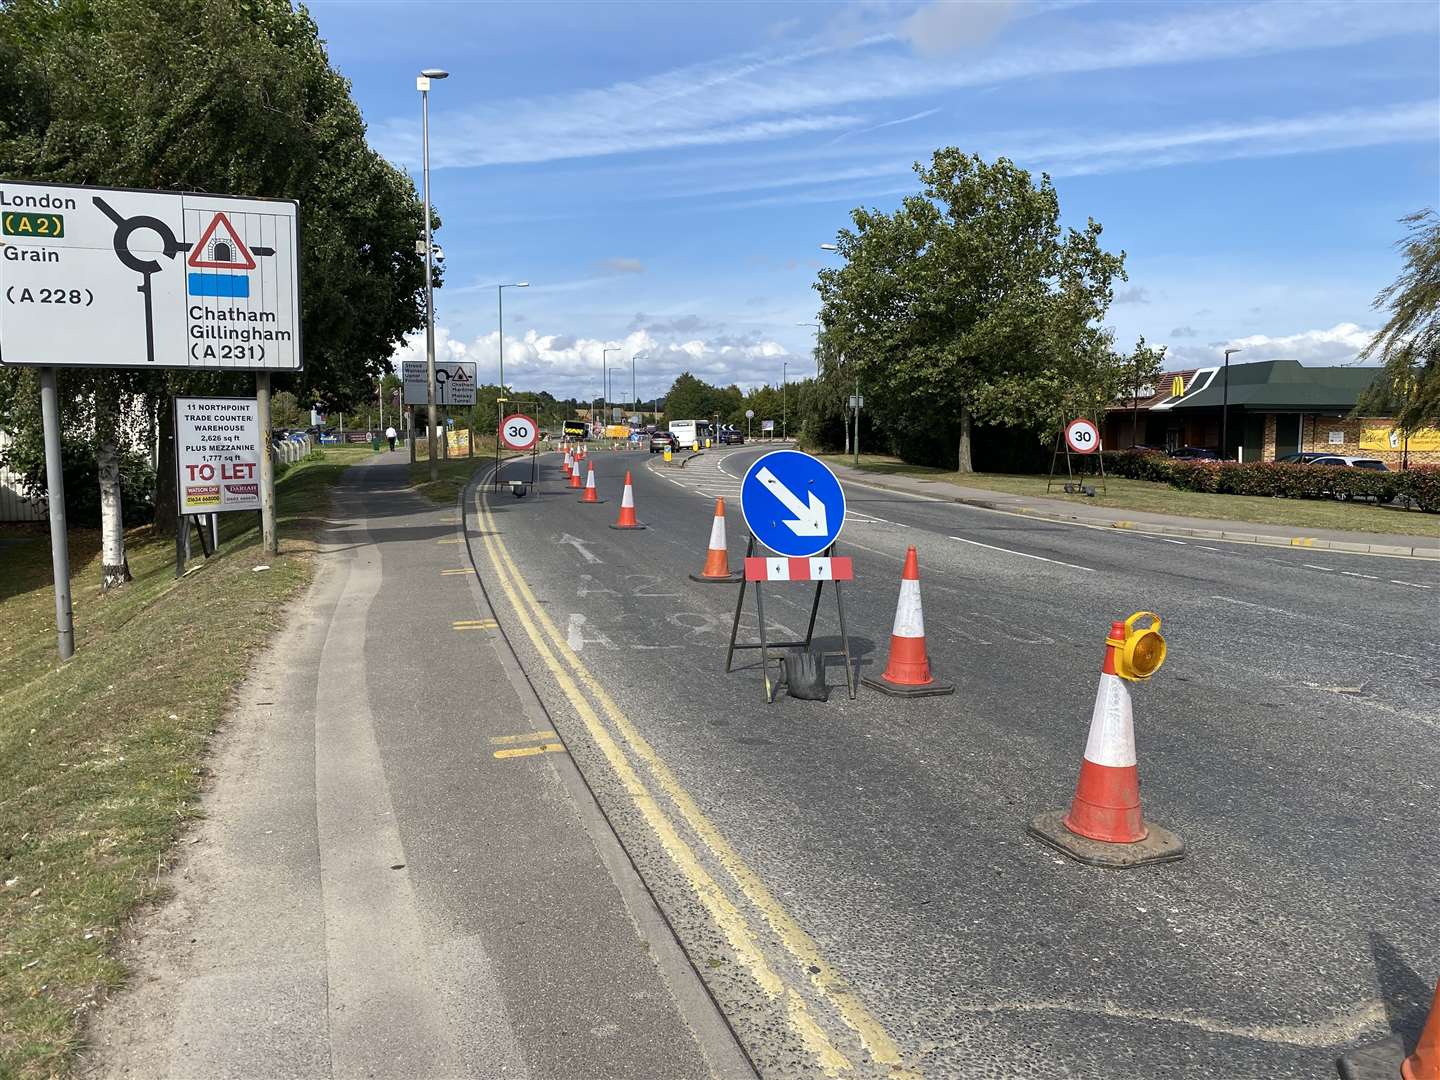 Roadworks to create a sliproad off the Medway City Estate on the Anthonys Way roundabout started as part of a £2m project to ease congestion